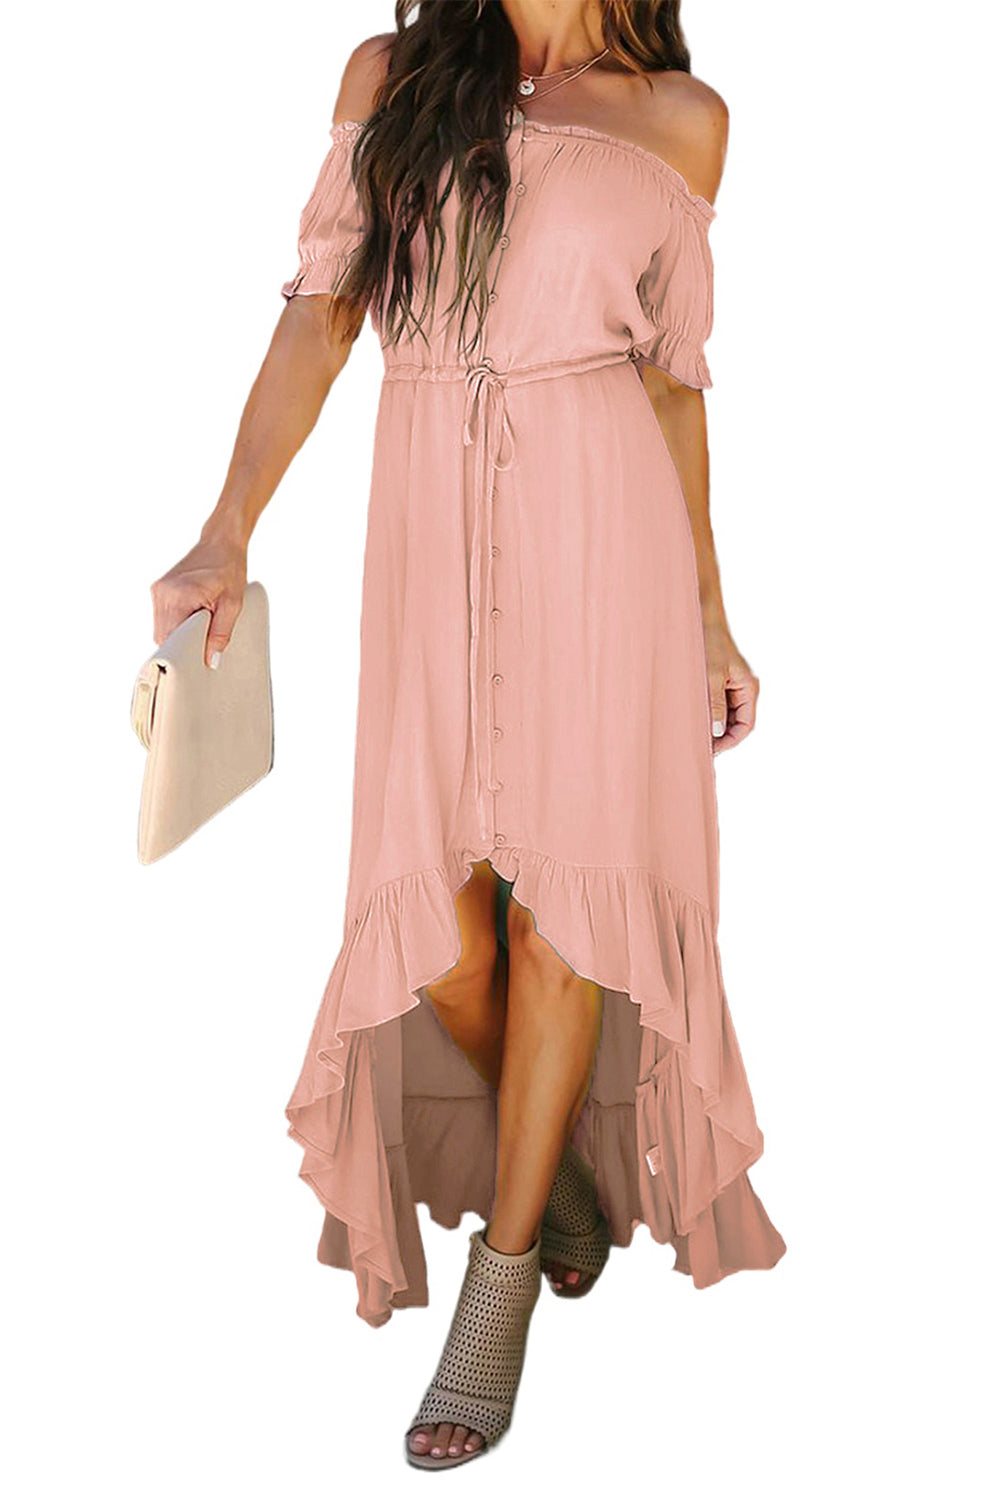 Pink White Off the Shoulder Dress High Low Maxi Dress  LC611566-10